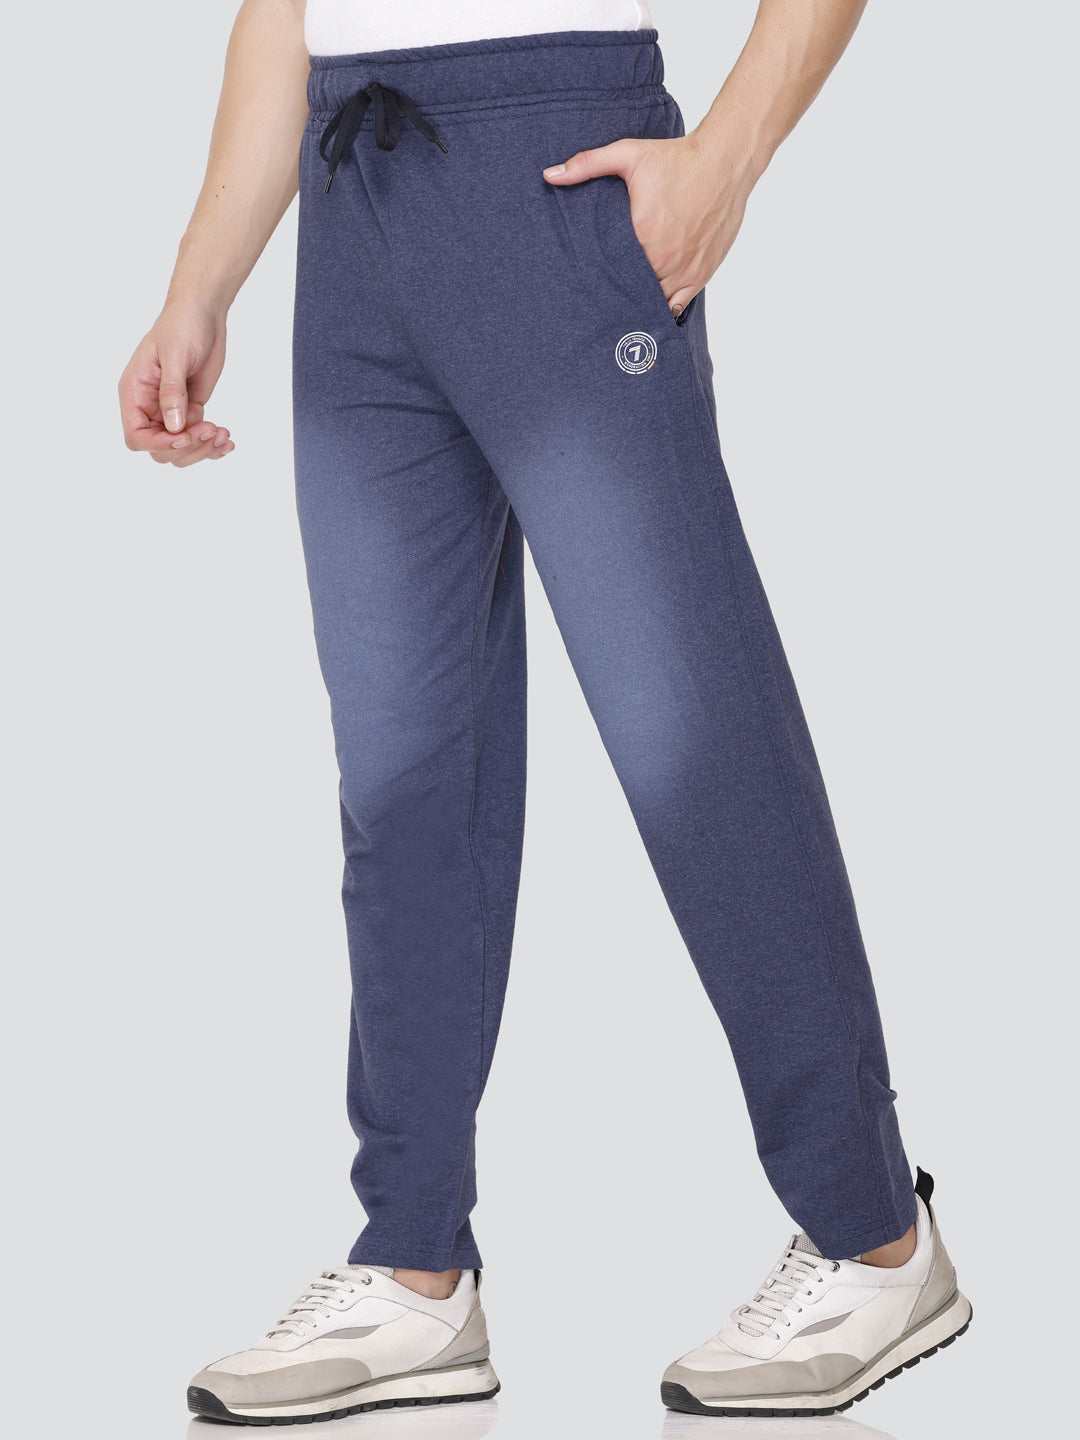 Stylish Denim Shaded Jinxer Cotton Trackpants for Women online in India